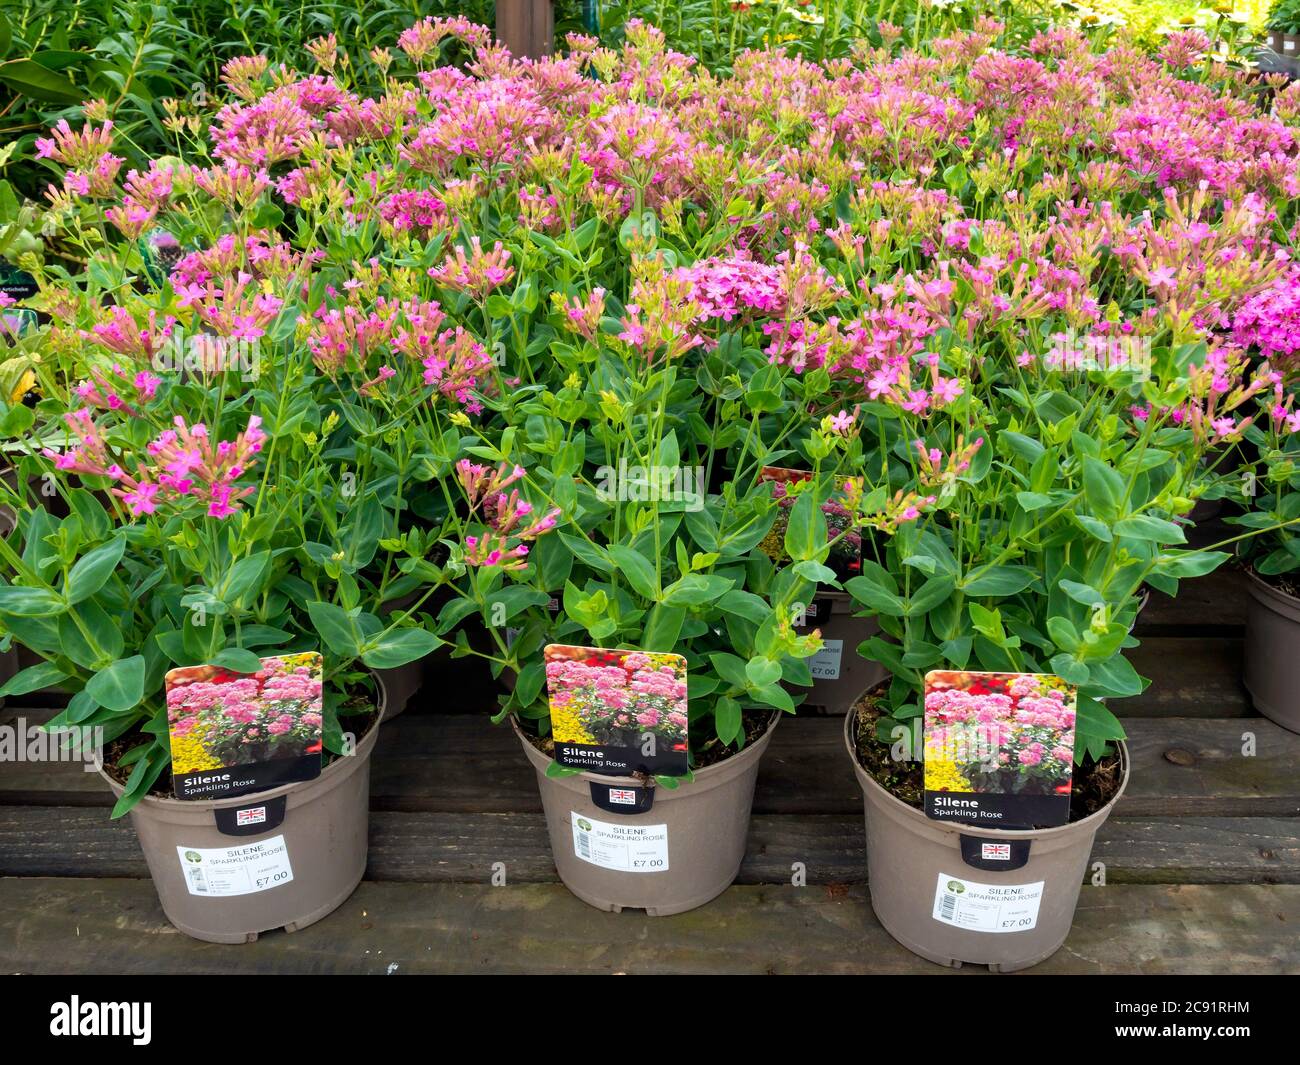 A display of Silene Sparkling Rose for sale in a North Yorkshire Garden Centre promoted as - a very British Summer Stock Photo